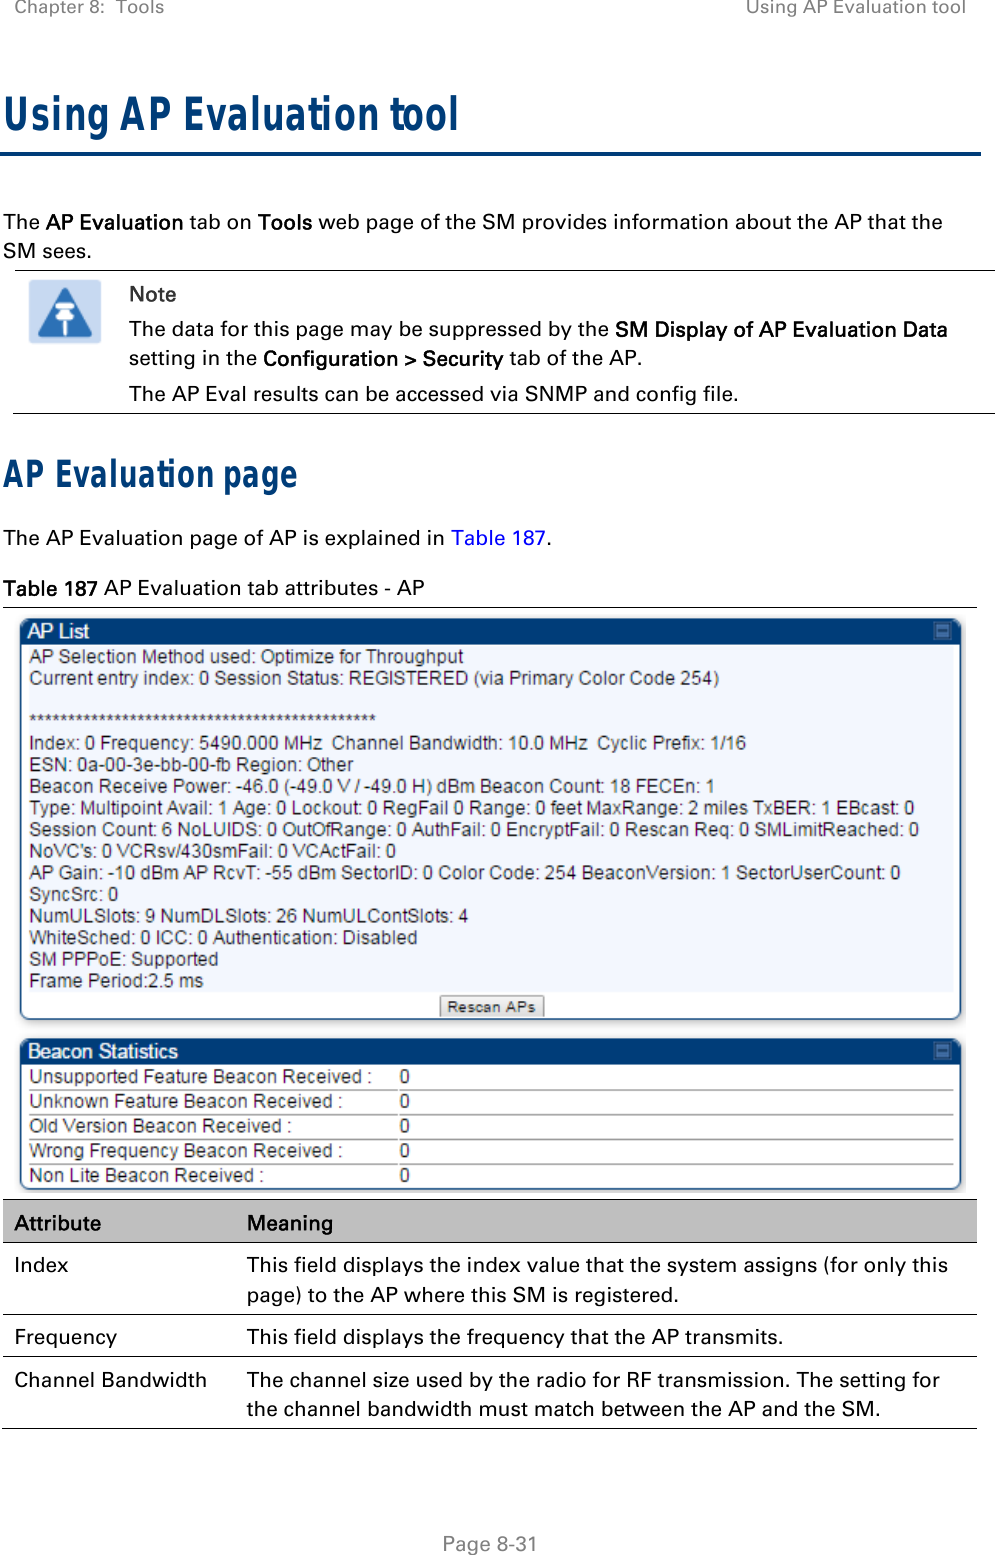 Chapter 8:  Tools  Using AP Evaluation tool   Page 8-31 Using AP Evaluation tool The AP Evaluation tab on Tools web page of the SM provides information about the AP that the SM sees.   Note The data for this page may be suppressed by the SM Display of AP Evaluation Data setting in the Configuration &gt; Security tab of the AP. The AP Eval results can be accessed via SNMP and config file. AP Evaluation page  The AP Evaluation page of AP is explained in Table 187. Table 187 AP Evaluation tab attributes - AP  Attribute  Meaning Index  This field displays the index value that the system assigns (for only this page) to the AP where this SM is registered. Frequency  This field displays the frequency that the AP transmits. Channel Bandwidth  The channel size used by the radio for RF transmission. The setting for the channel bandwidth must match between the AP and the SM.  